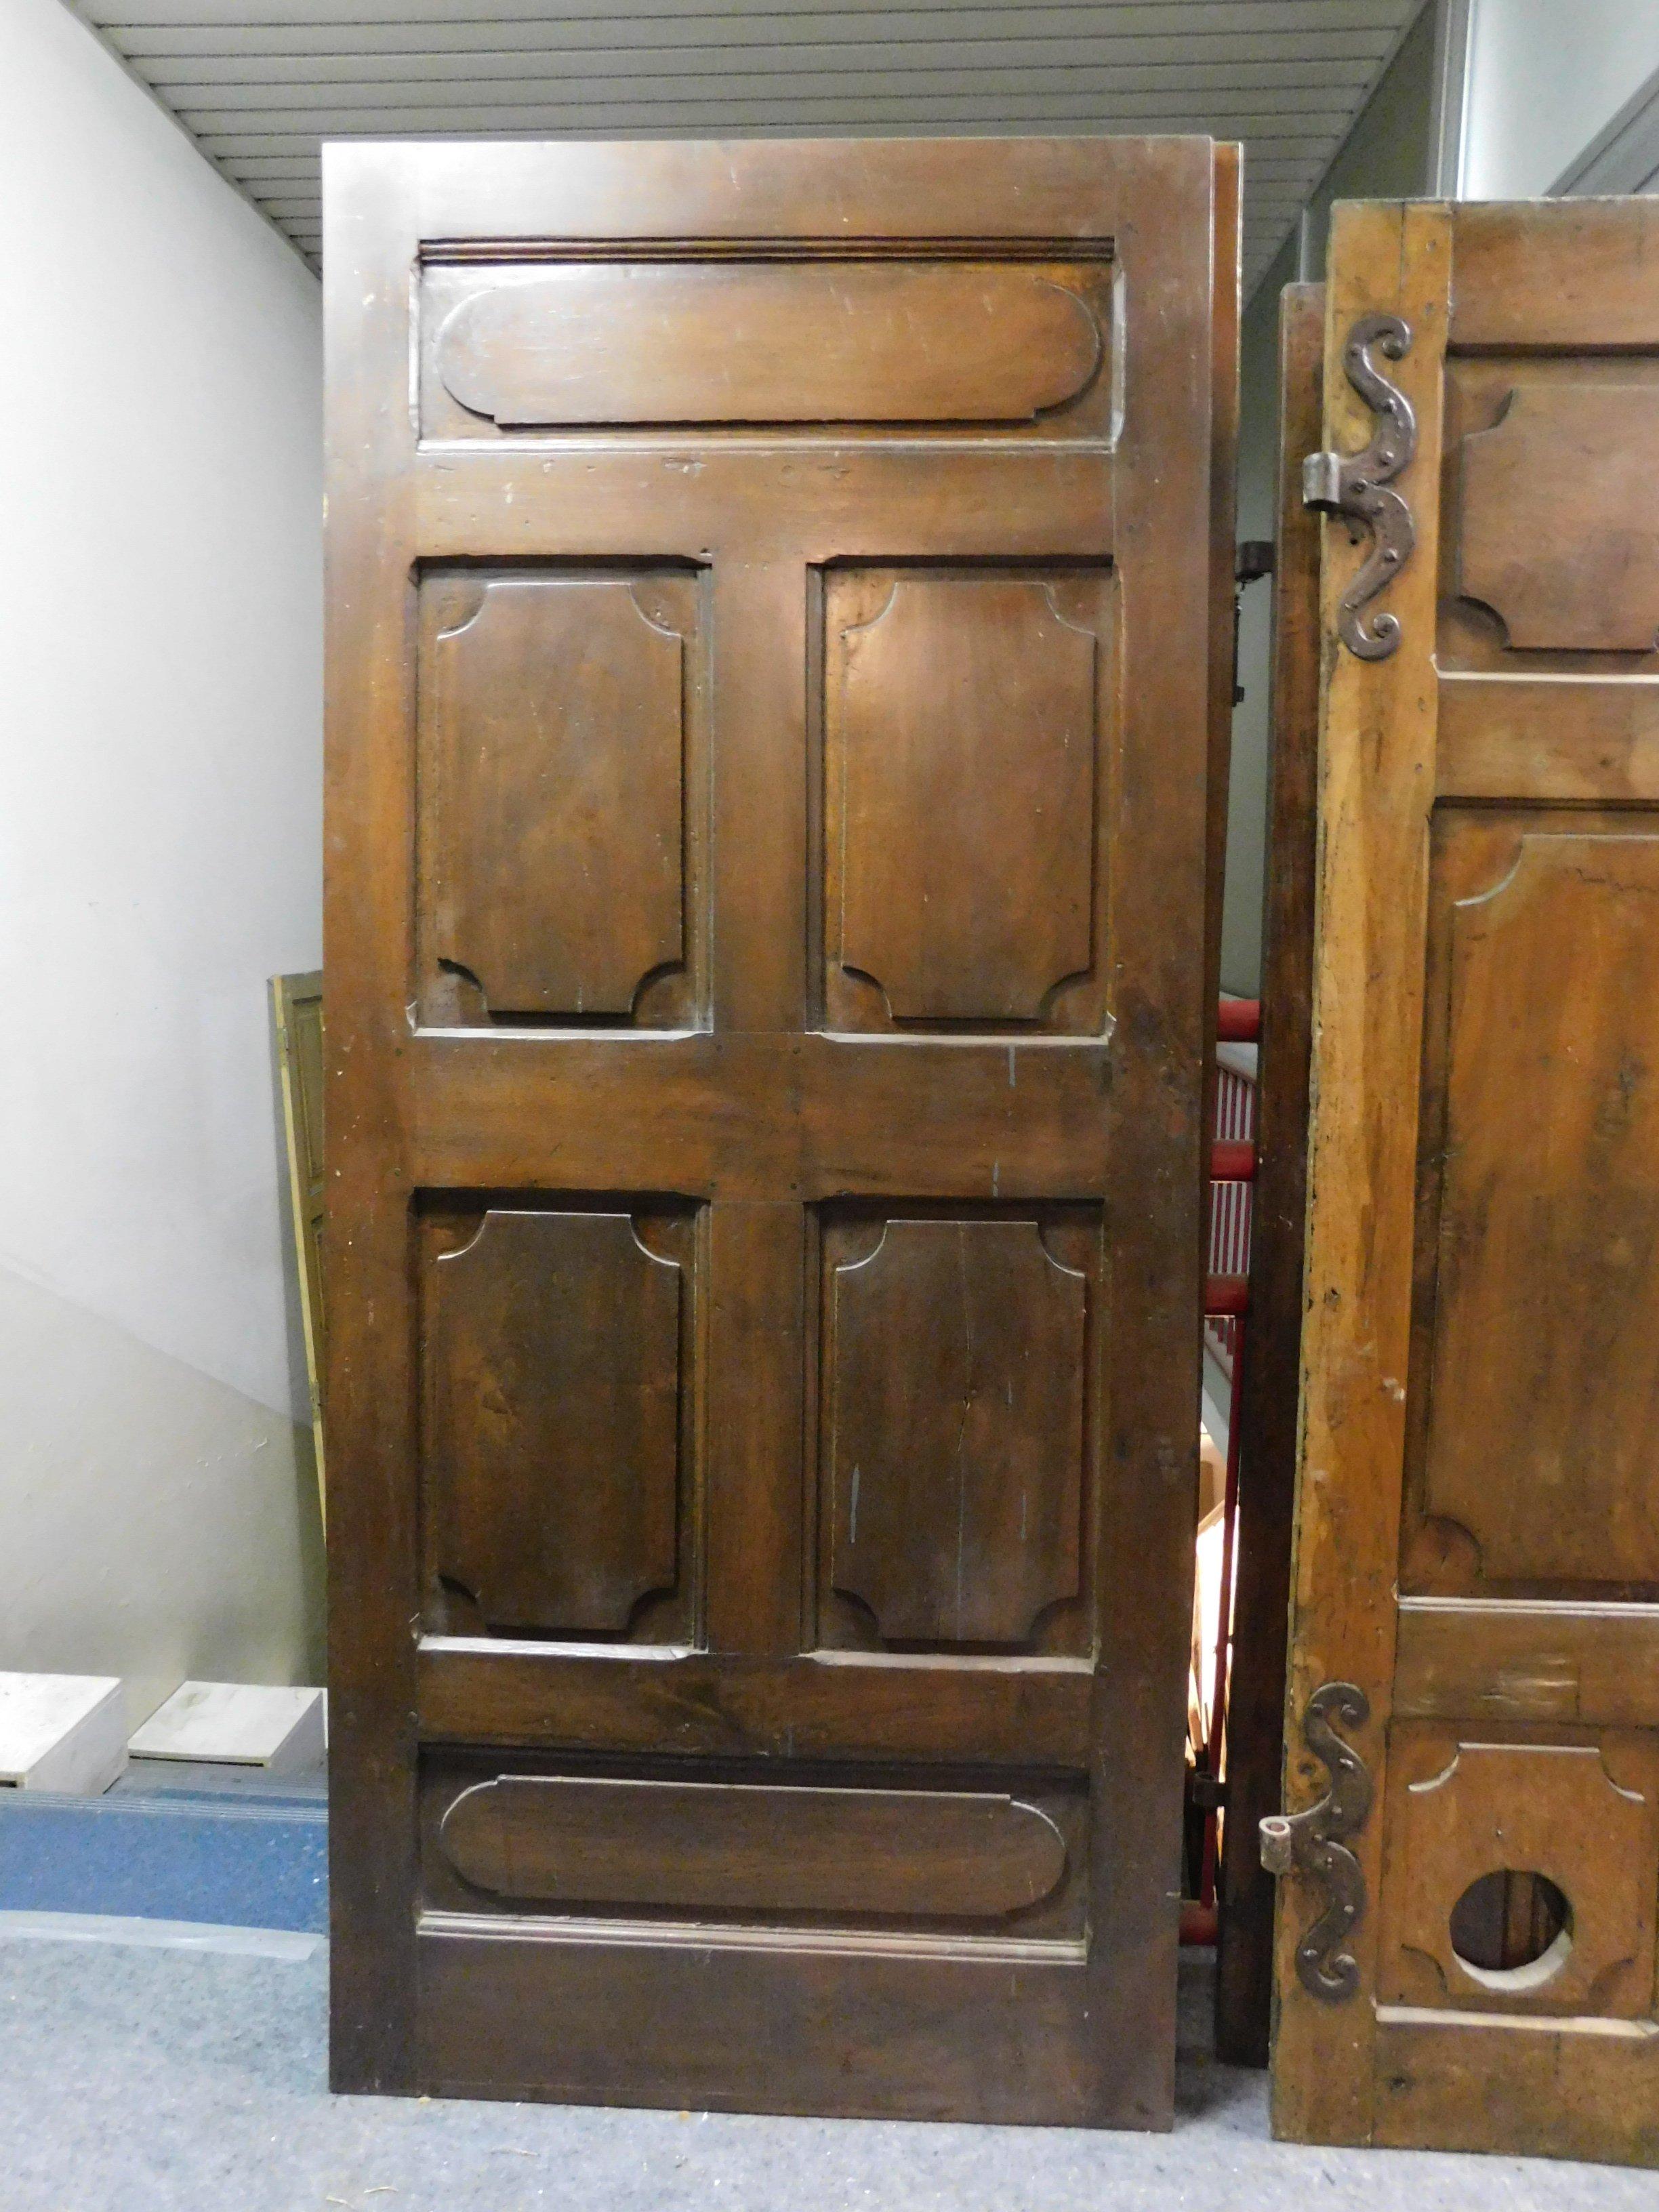 Set of 2 antique doors, handmade in precious walnut, dark brown solid wood typical of very hard wood, hand carved panels, and in very good condition, still with original irons, made in Italy in the 18th century.
2 sold separately, but exceptional